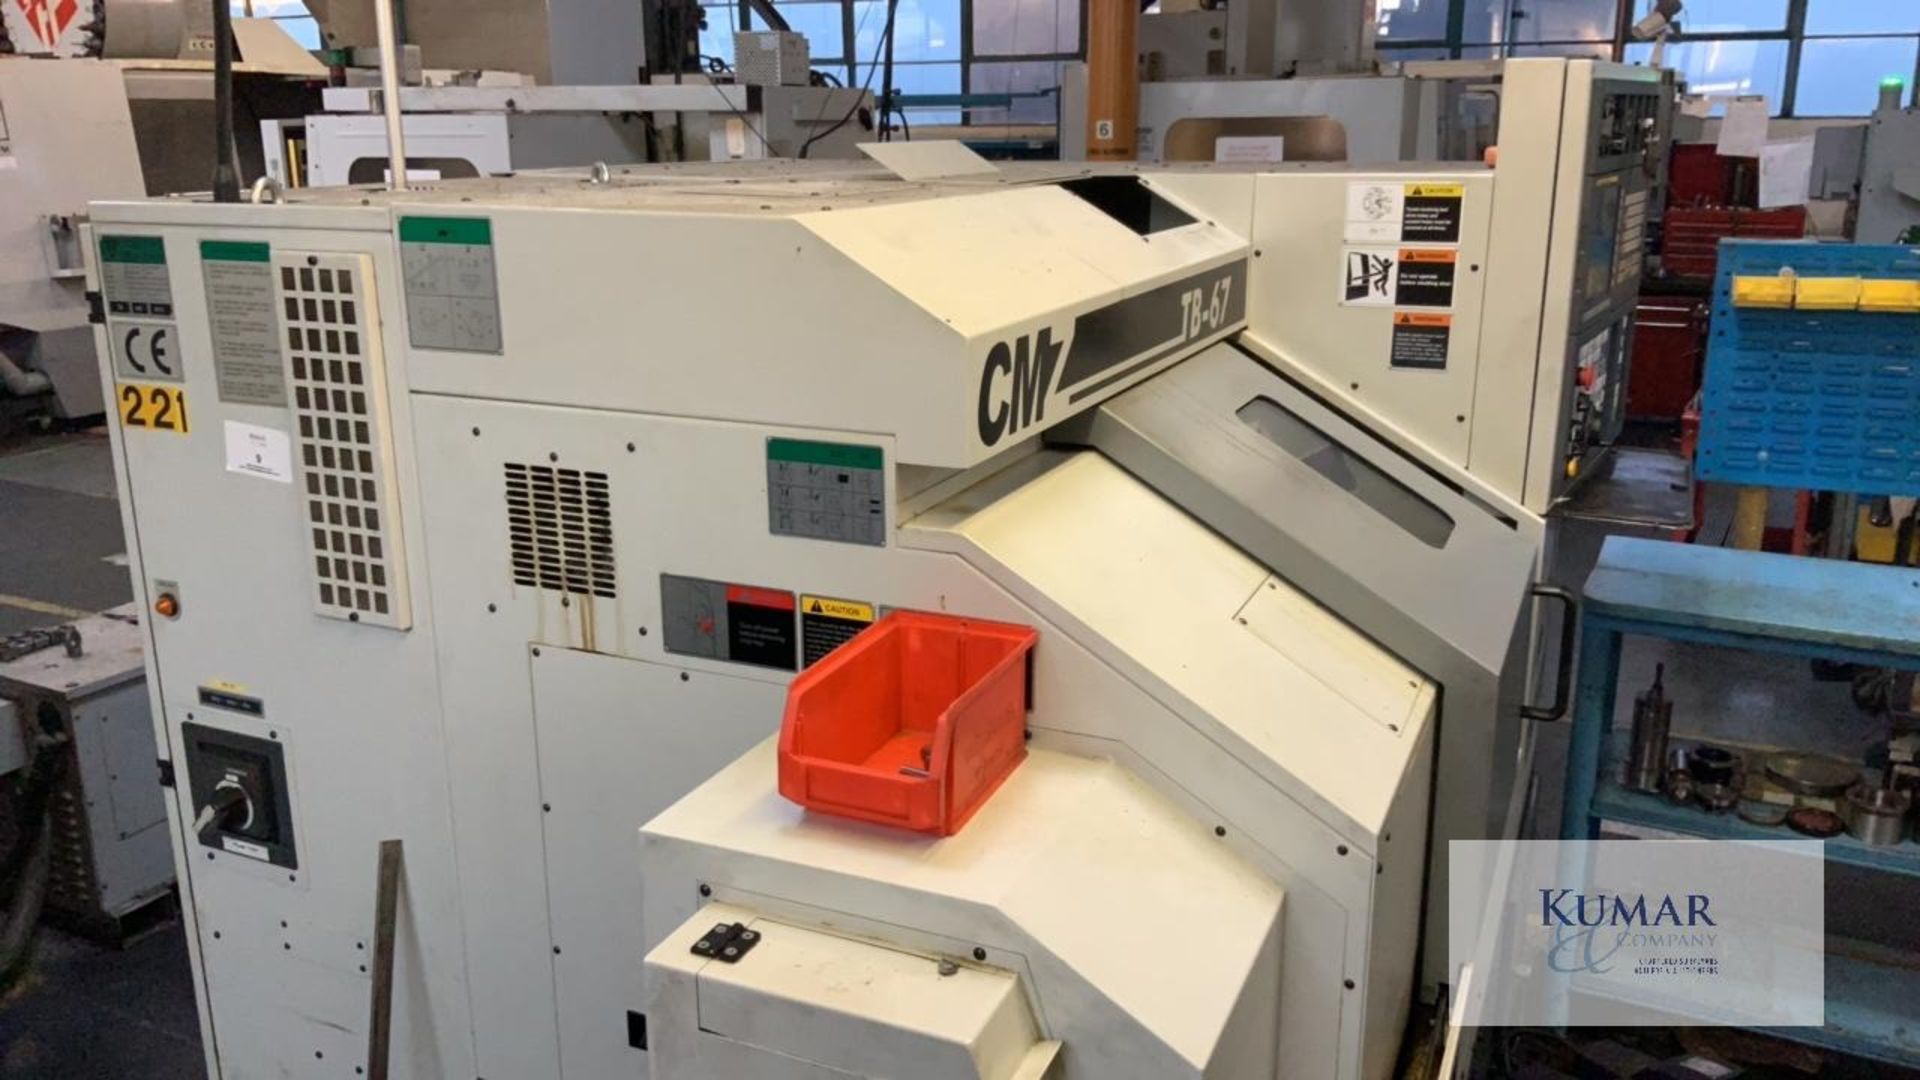 CMZ Model TB 67 CNC Slant Bed Lathe, Serial No TB497 (2013) including tooling and attachments as - Image 5 of 15